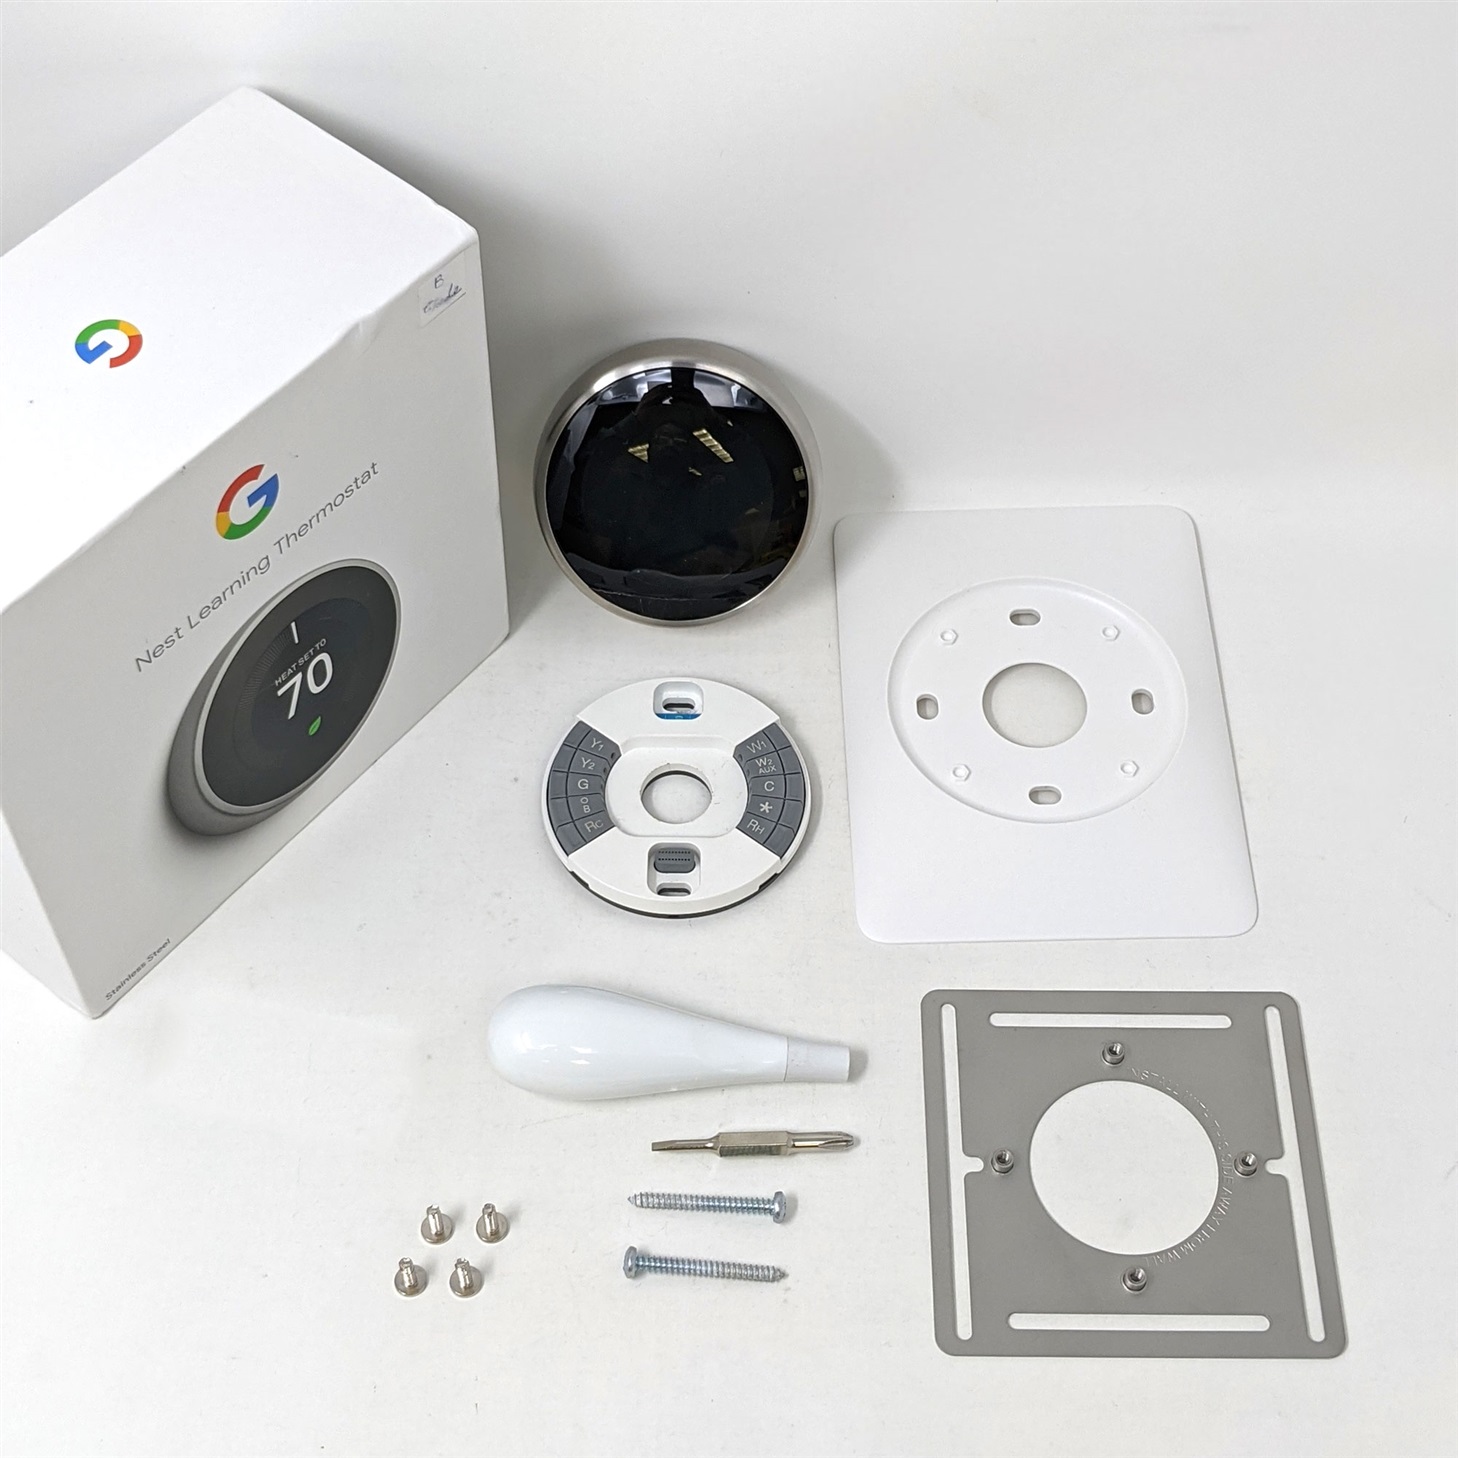 Nest Grade B Google Nest Learning Smart Wi-Fi Thermostat T3007US - Stainless Steel